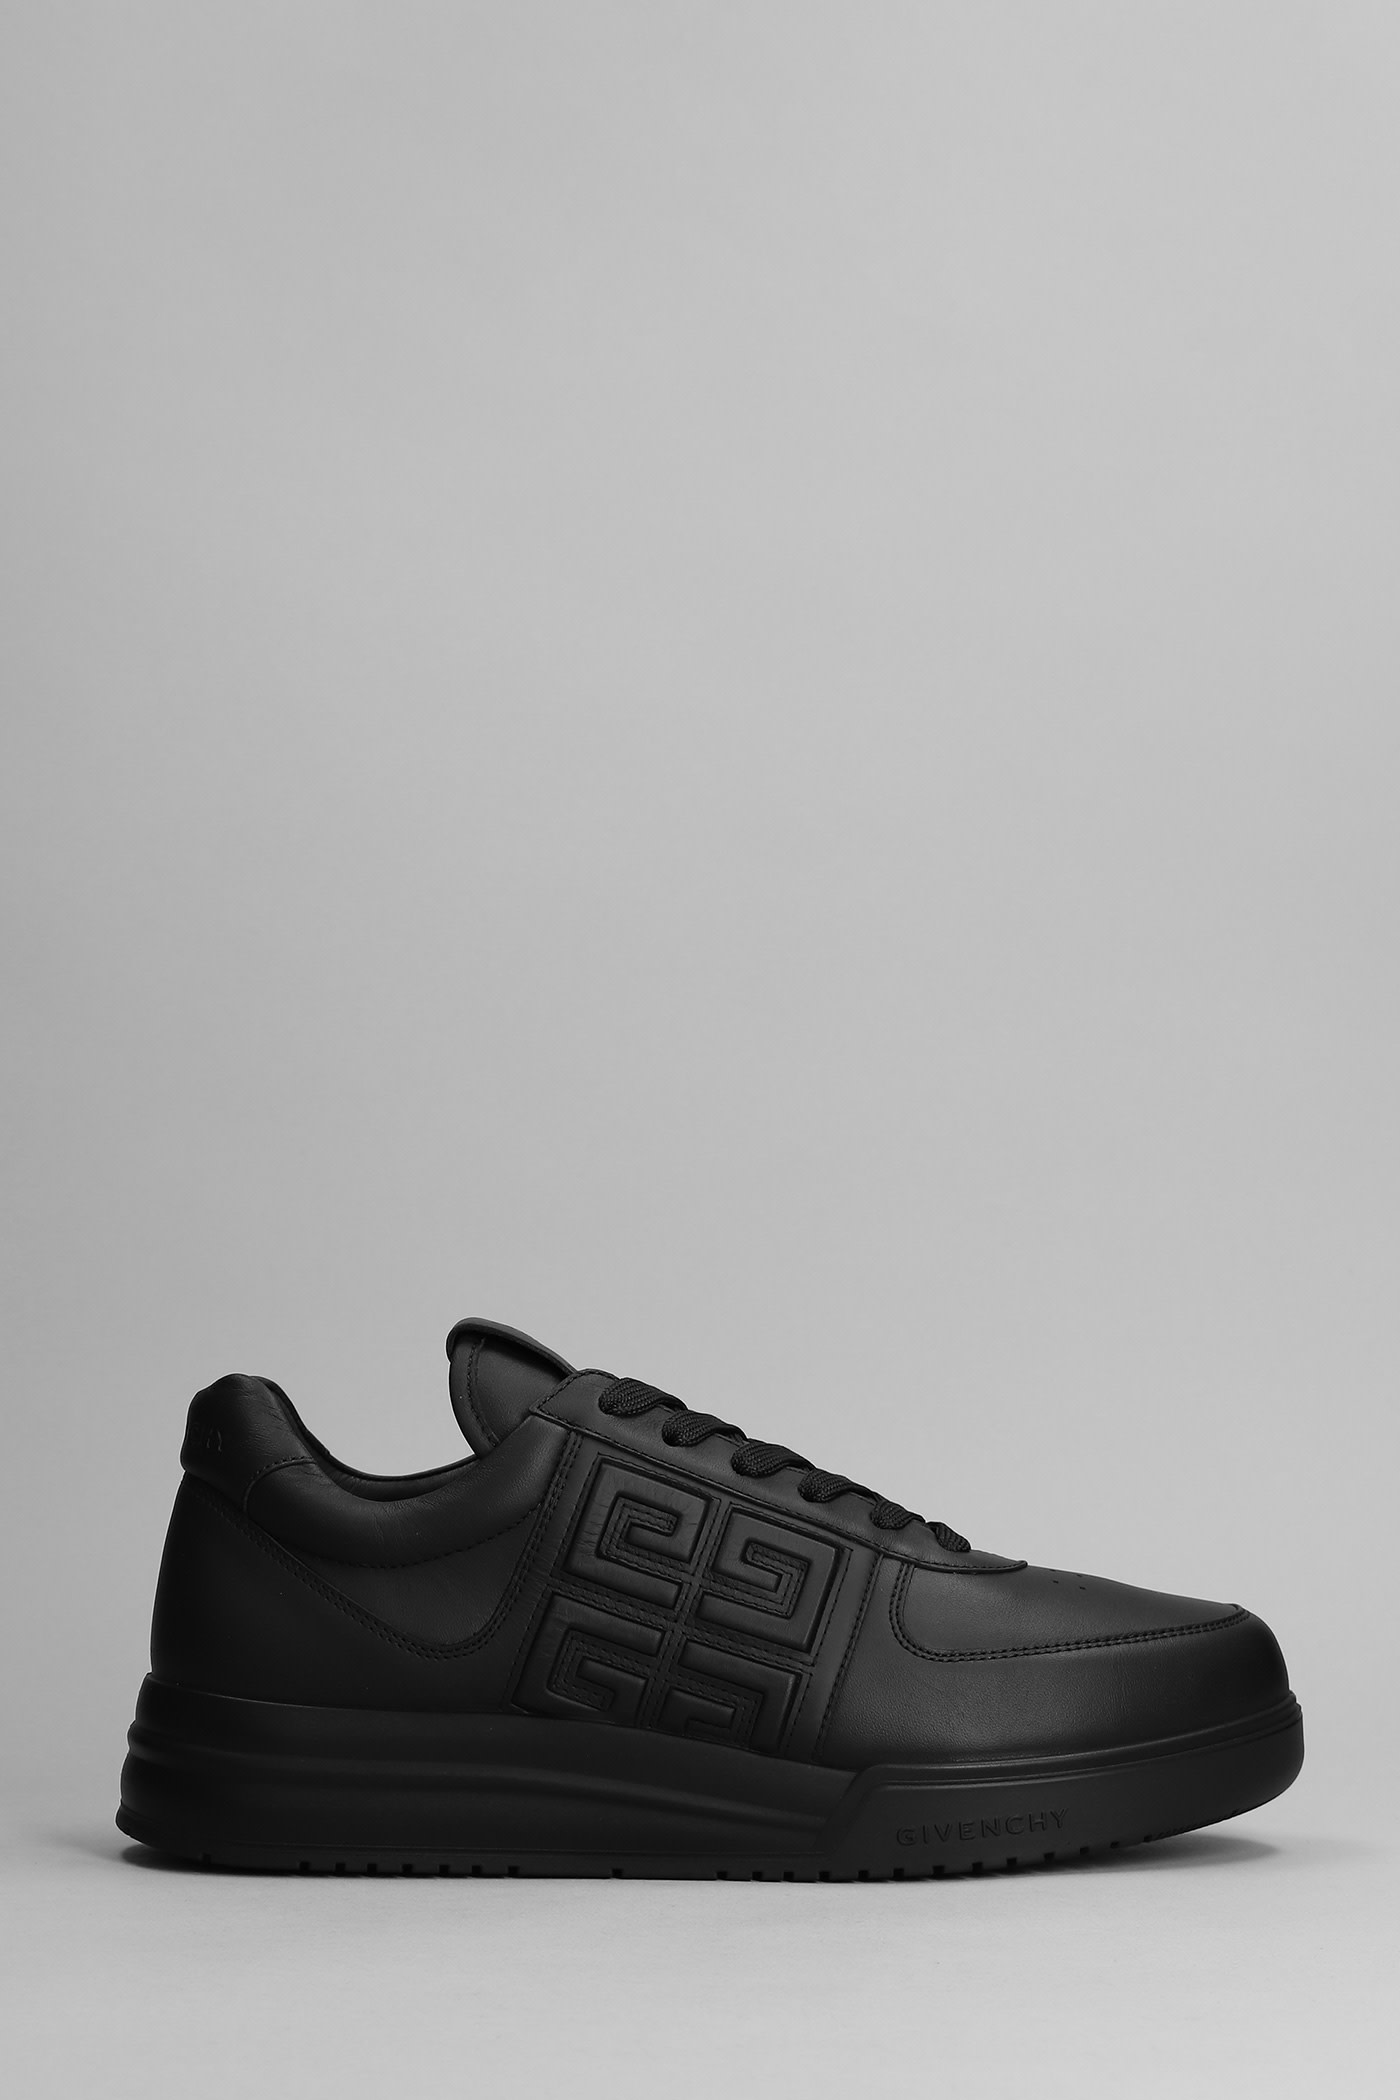 Givenchy G4 Low Sneakers In Black Leather